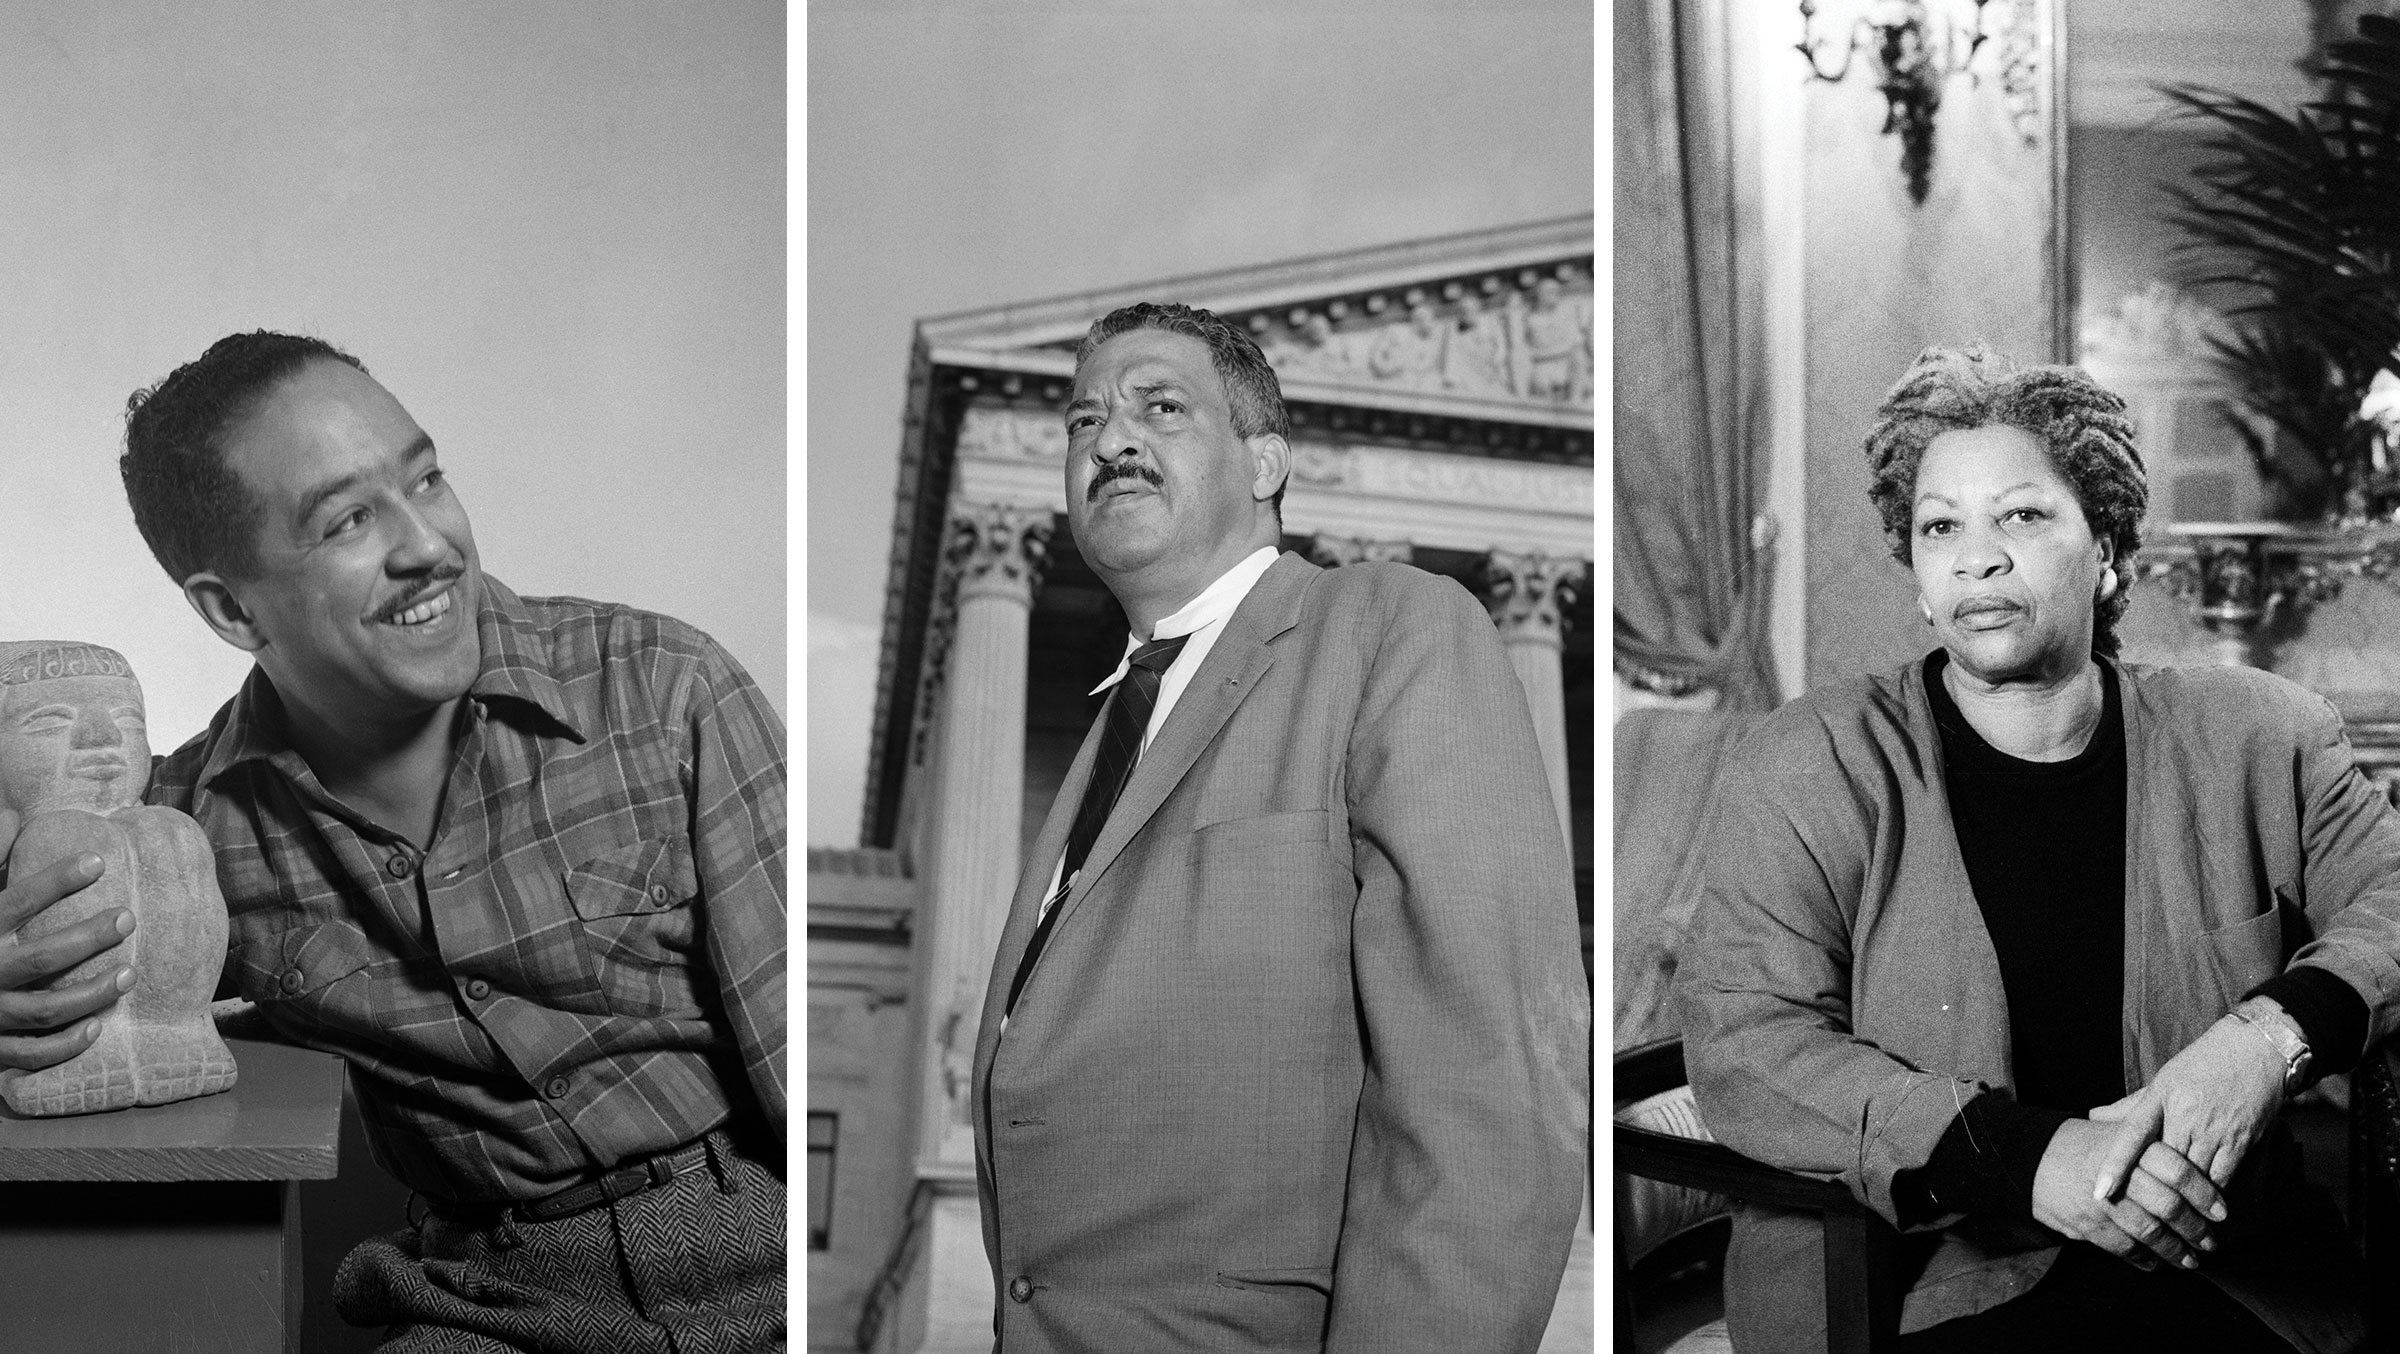 From left to right:  Poet and social activist Langston Hughes, Supreme  Court Justice Thurgood Marshall, and novelist Toni Morrison. All three are among the Black luminaries taught as part of a new AP African American Studies course that is being piloted in high schools across the U.S. in 2022. (Getty Images (3))